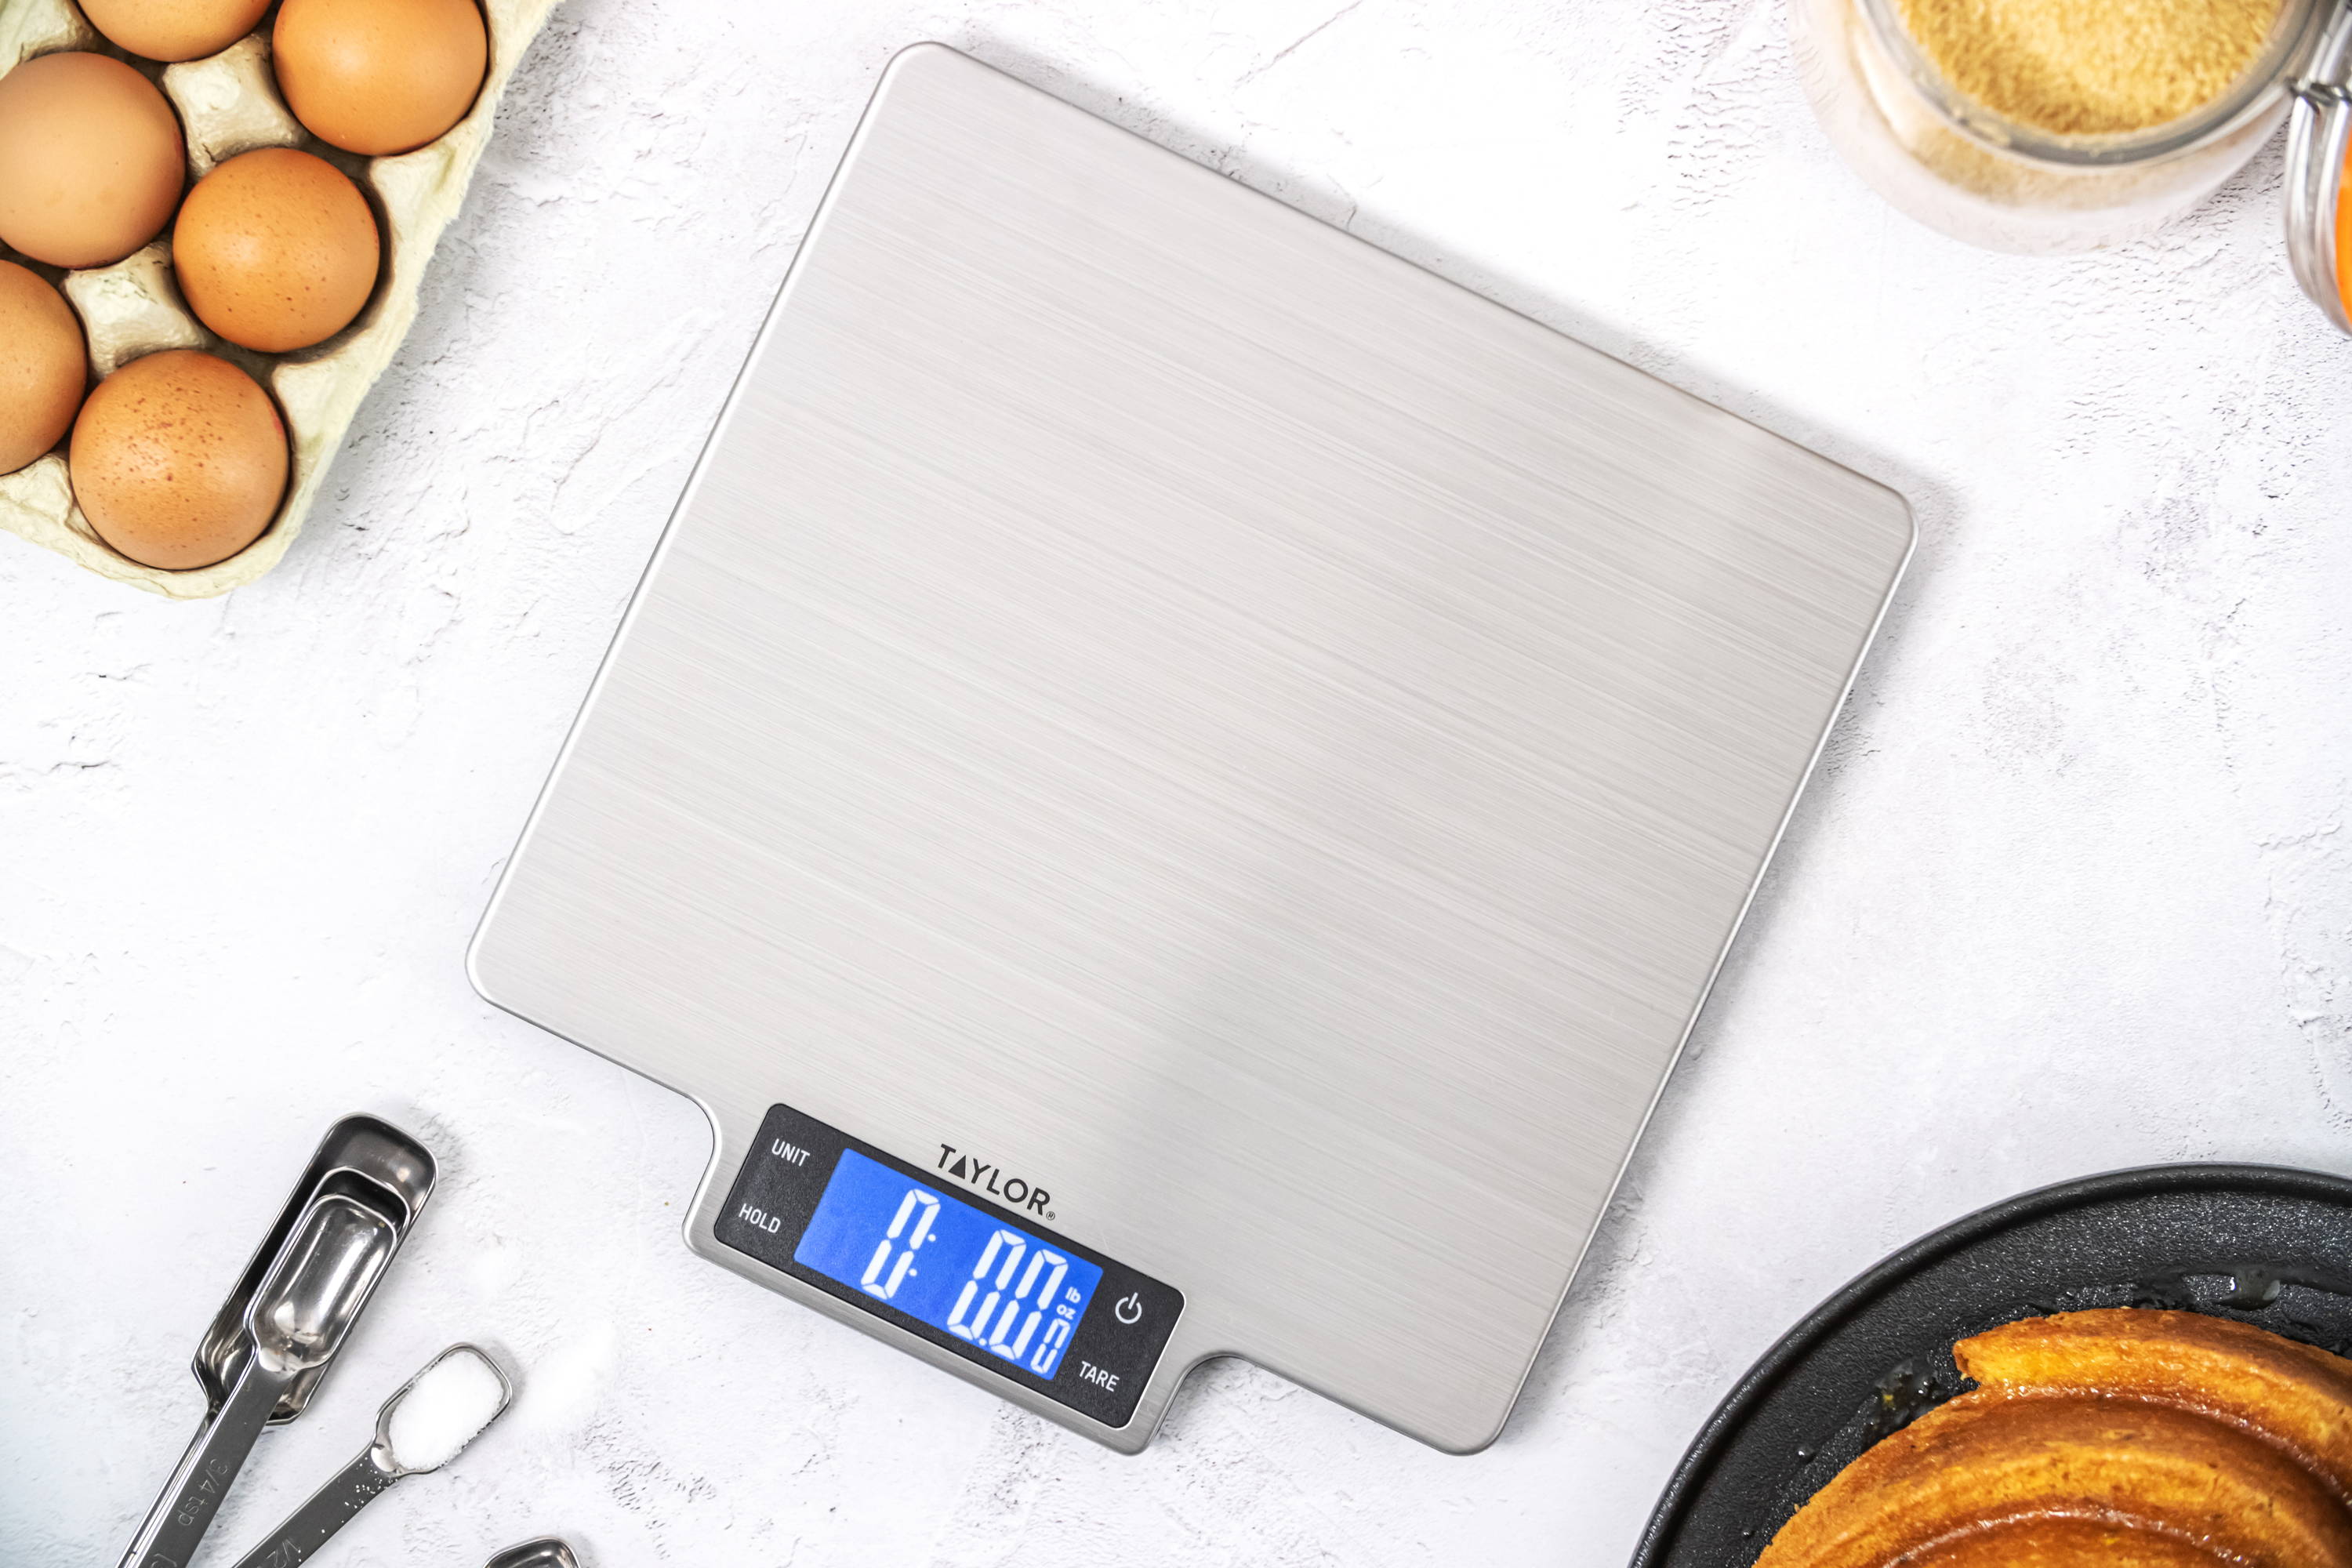 Taylor Modern Mechanical Kitchen Weighing Food Scale Weighs up to 11lbs,  Measures in Grams and Ounces, Black and Silver 